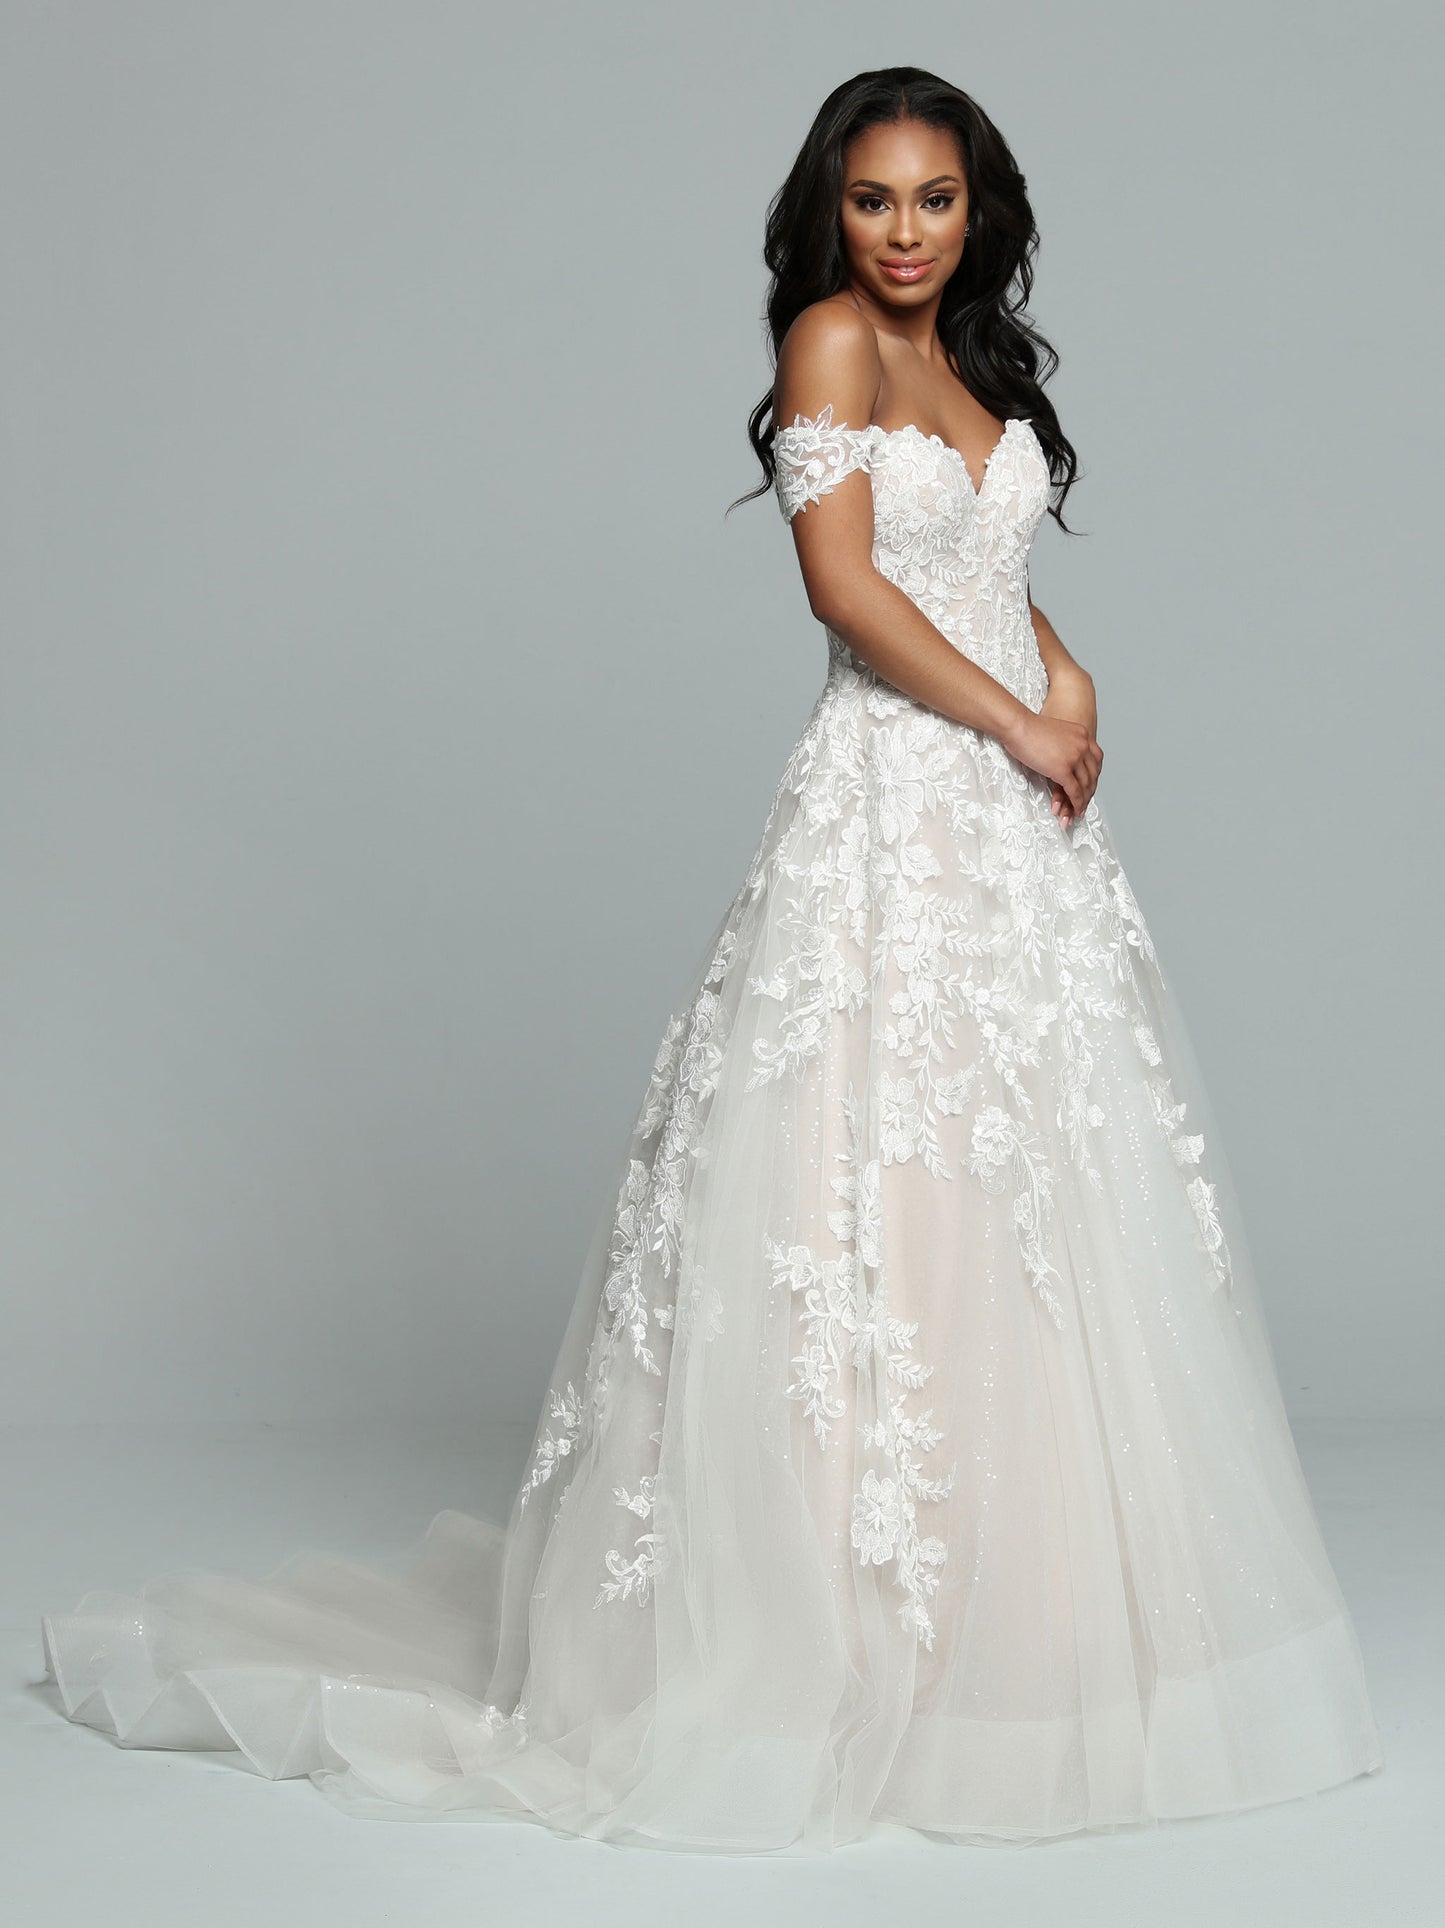 Davinci Bridal 50668 is an A Line formal wedding dress. Featuring a fitted bodice with off the shoulder sheer removable straps and sweetheart neckline. Floral lace embellishments over a sequin shimmer ballgown skirt with train. Lace up corset back.   Available Sizes: 2-20  Available Colors: Ivory/Ivory, Ivory/Latte, White/White